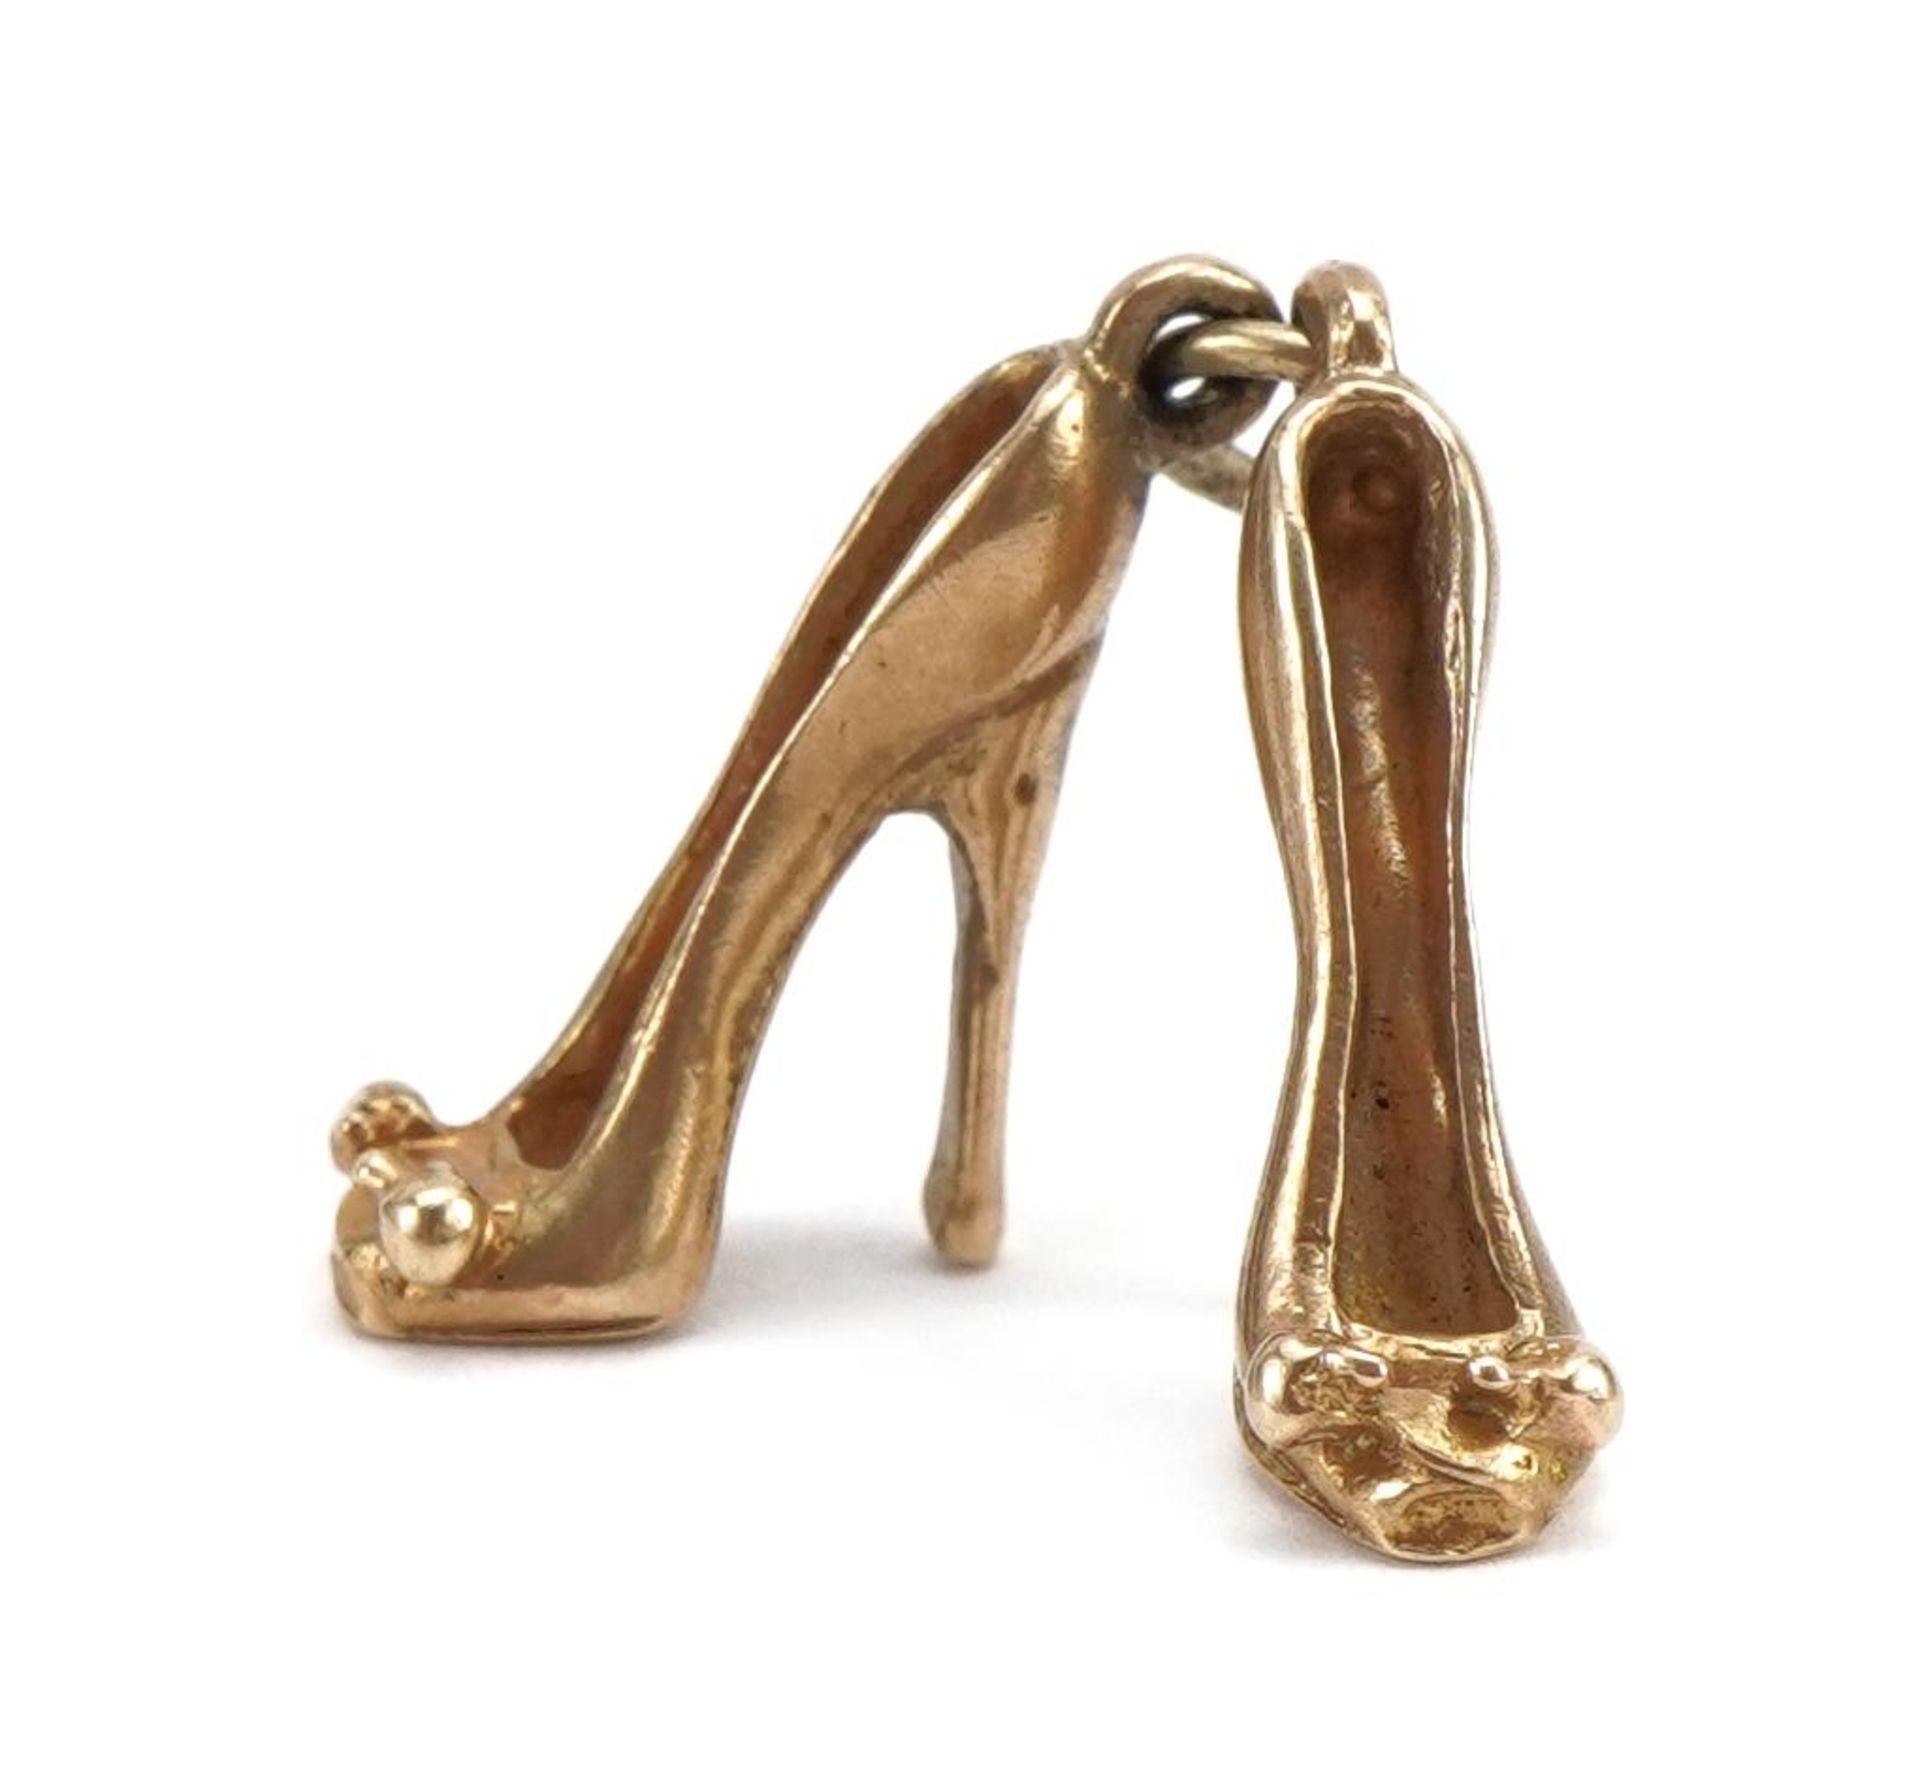 9ct gold pair of high heel shoes charm, 1.4cm high, 2.2g : For further information on this lot